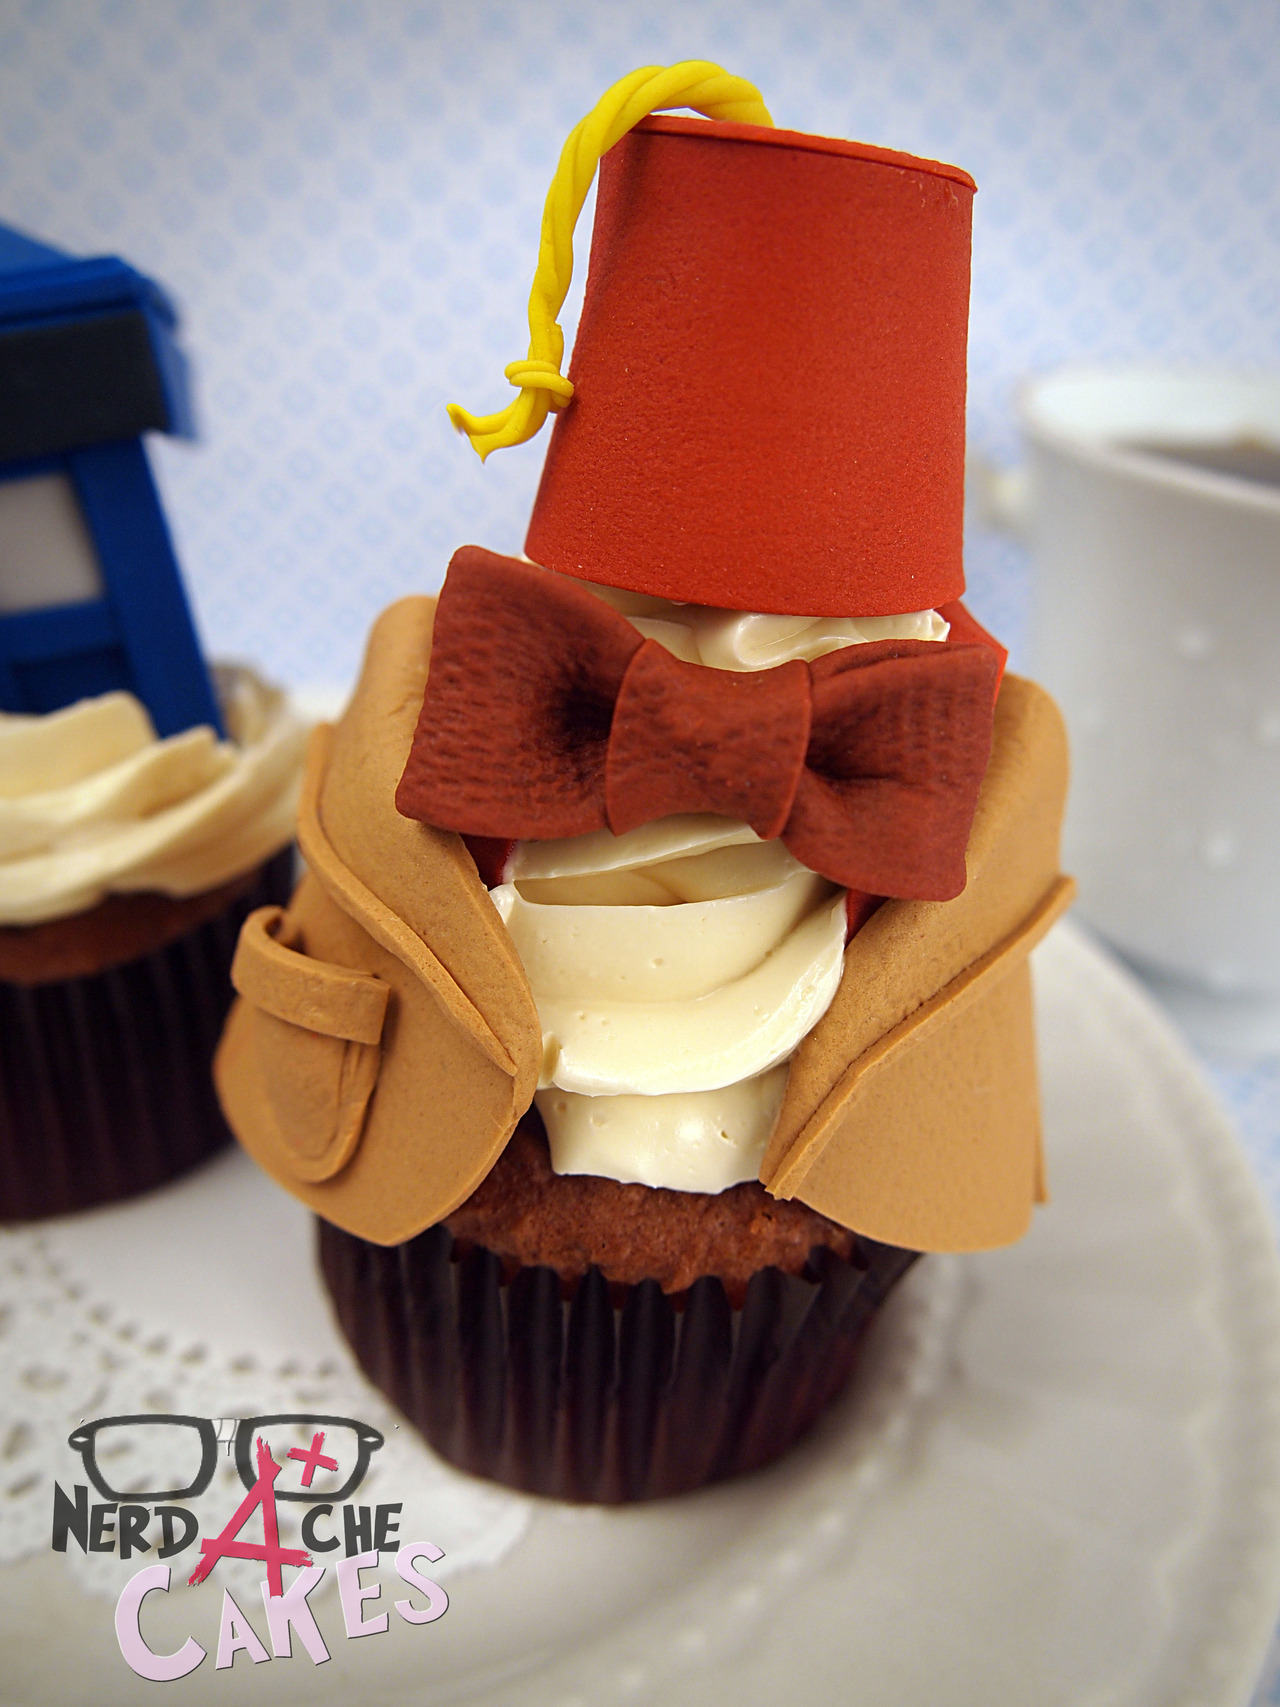 Cake Doctor Cupcakes